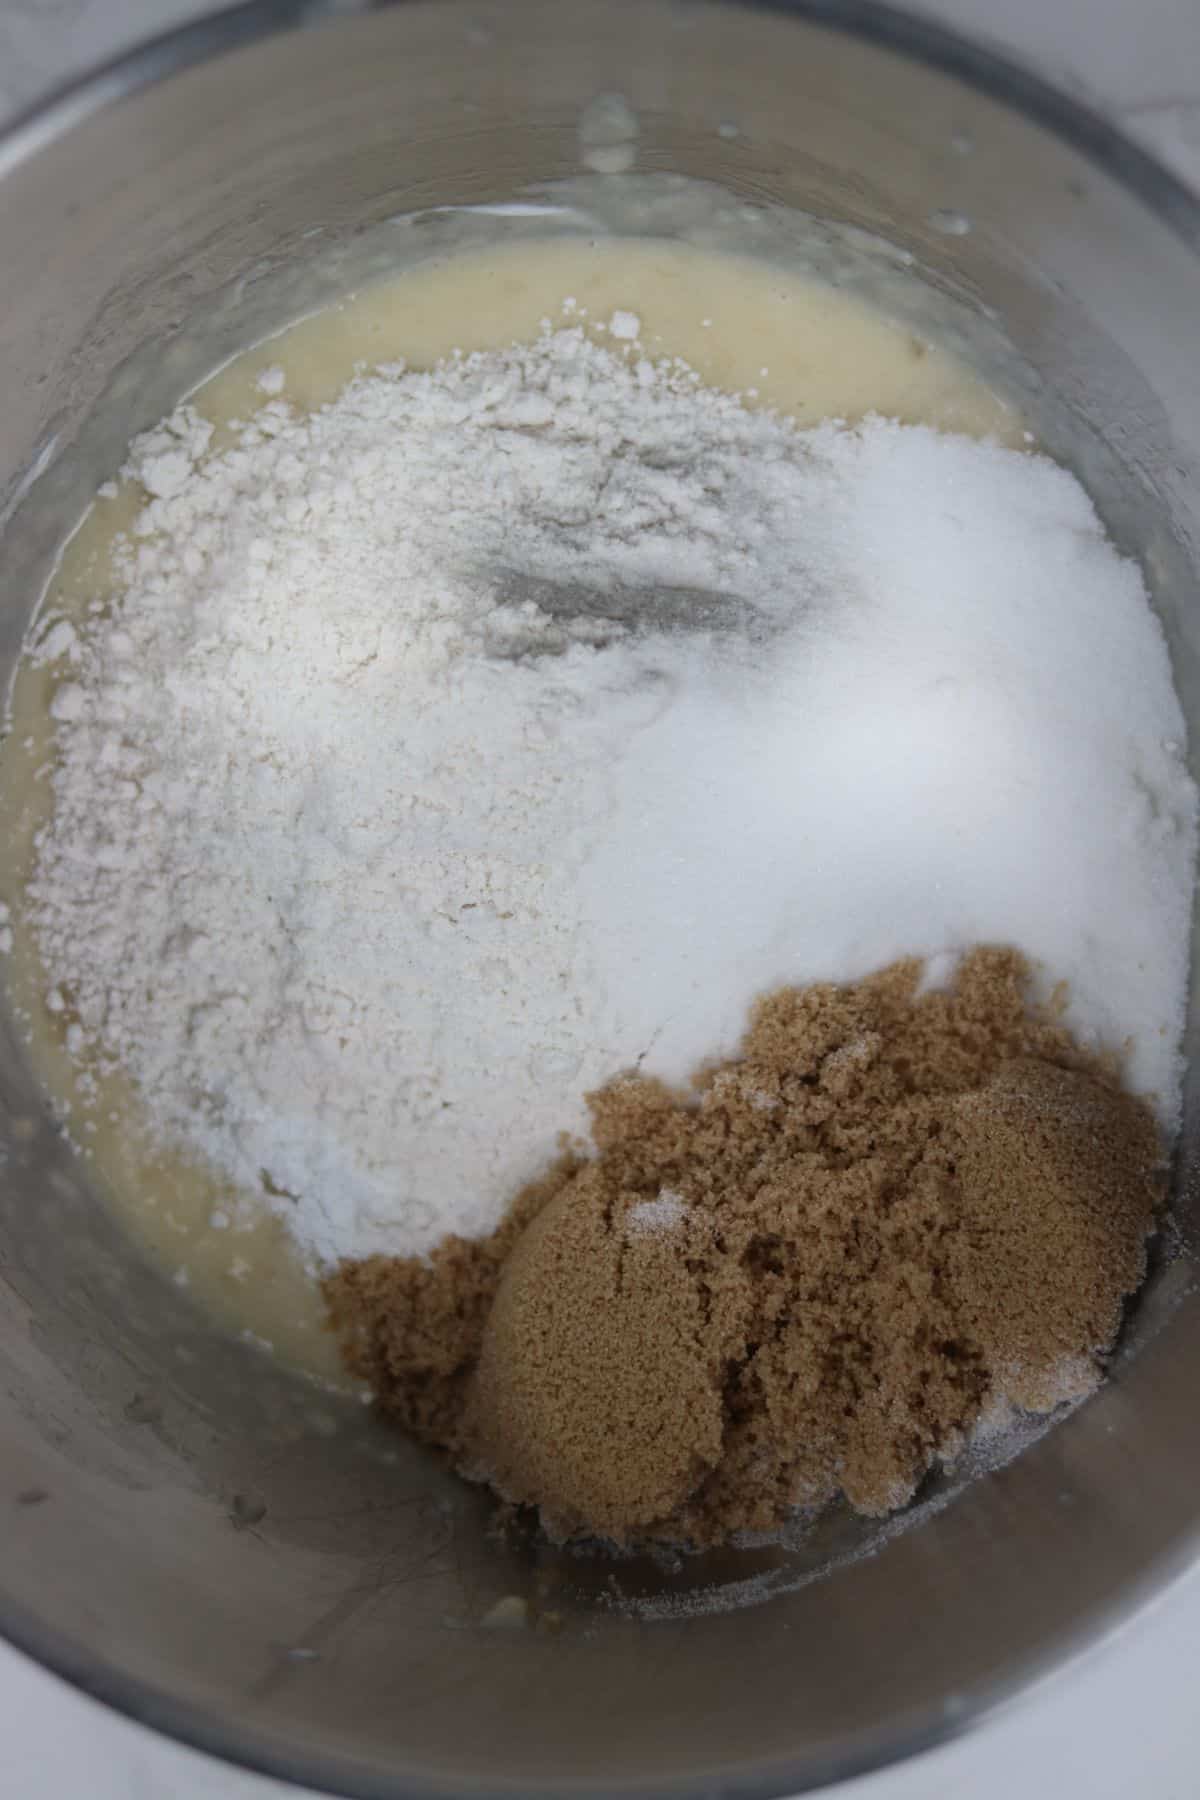 dry ingredients being added to wet ingredients